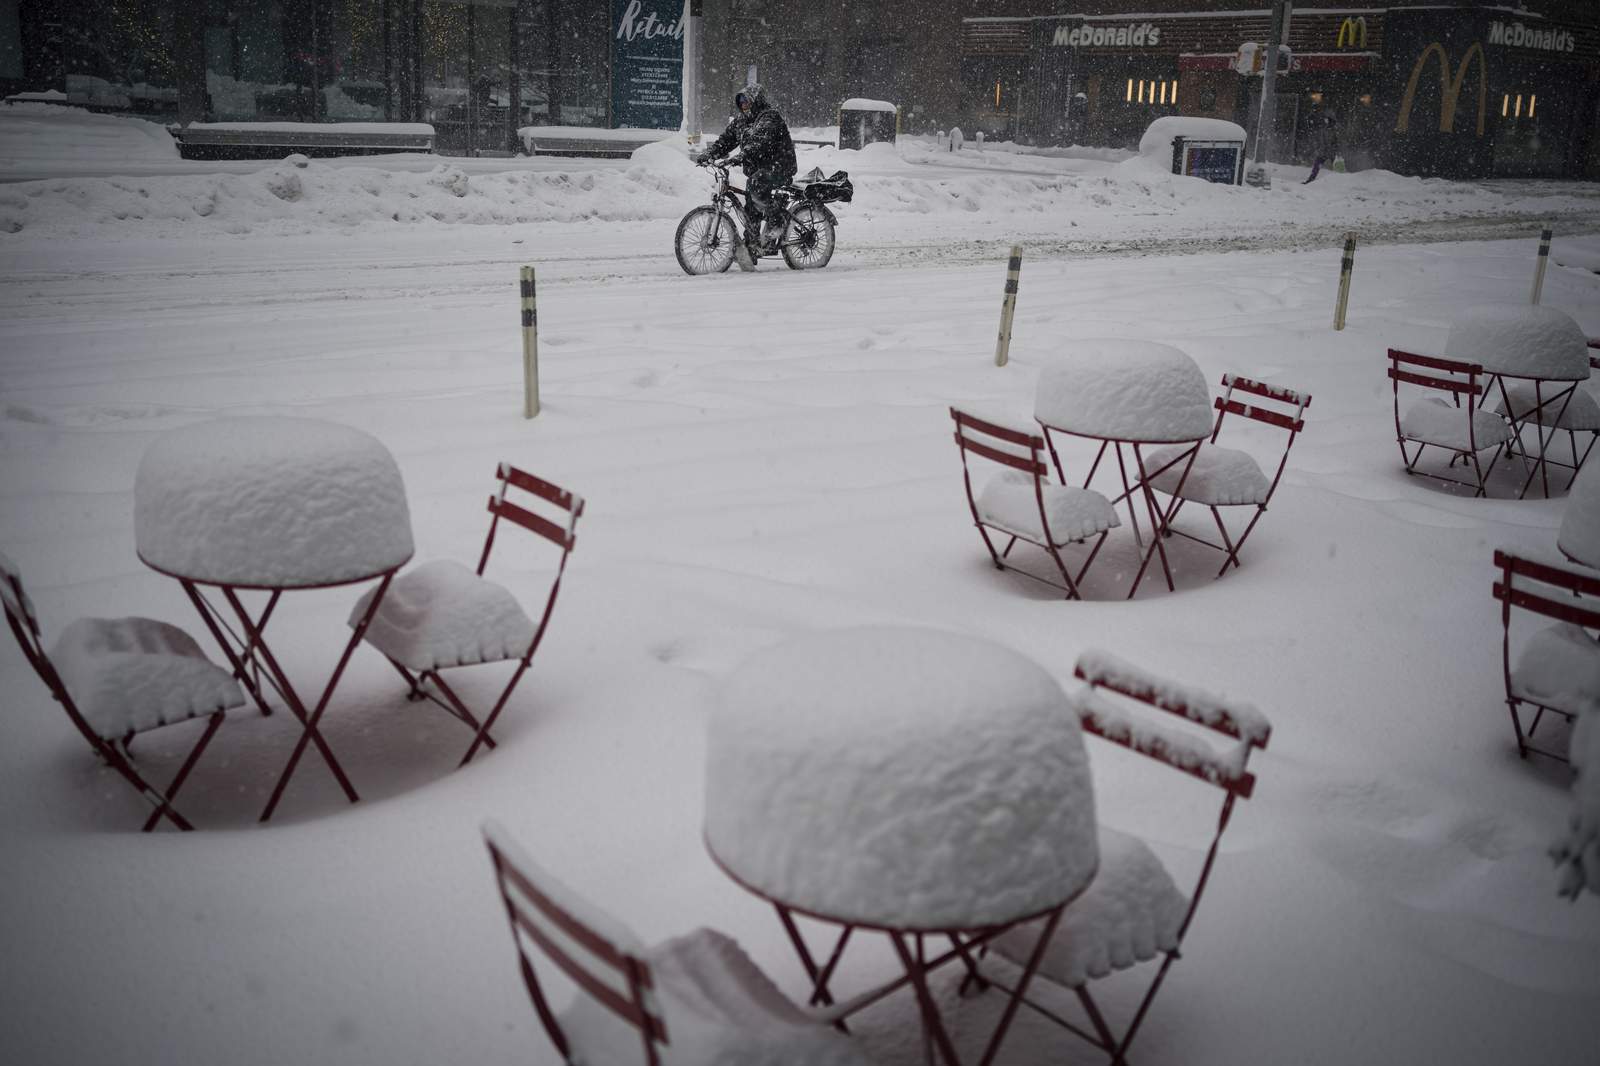 'A long two days': Major storm pummels Northeast with snow